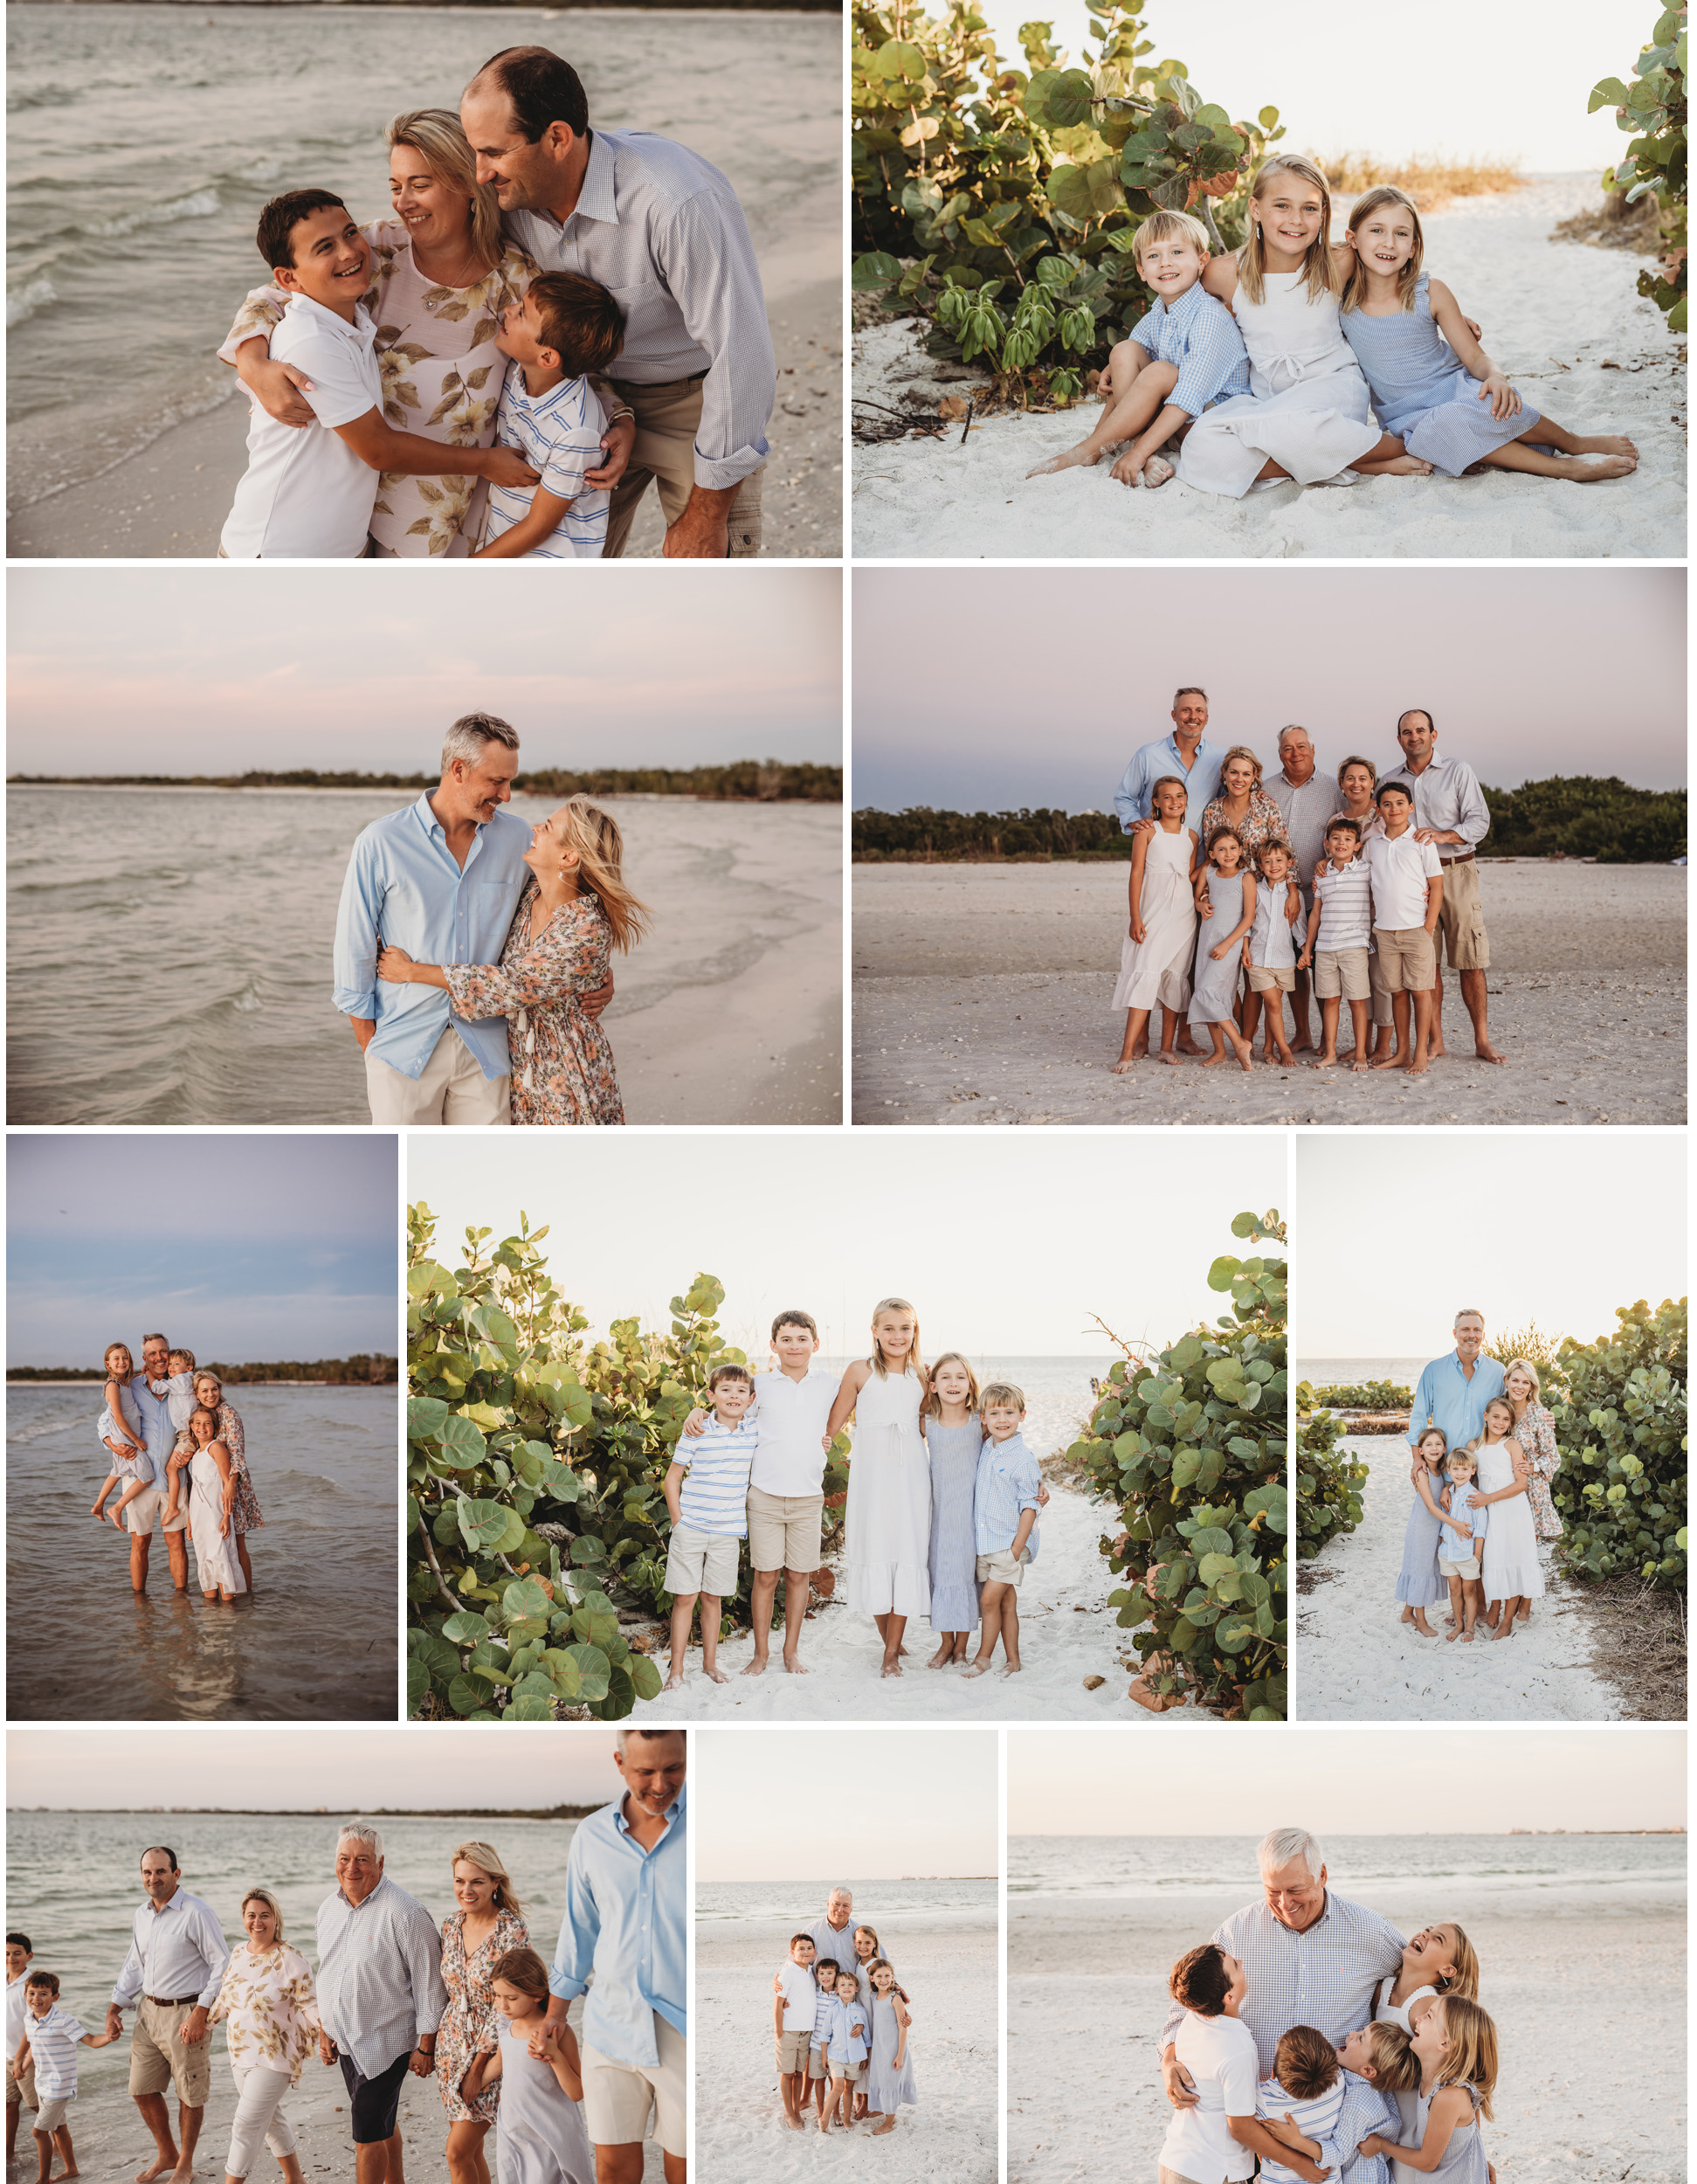 A large family gathers on the beach in Bonita Springs for a sunset photo shoot. The grandkids and sisters join their dad for pictures.